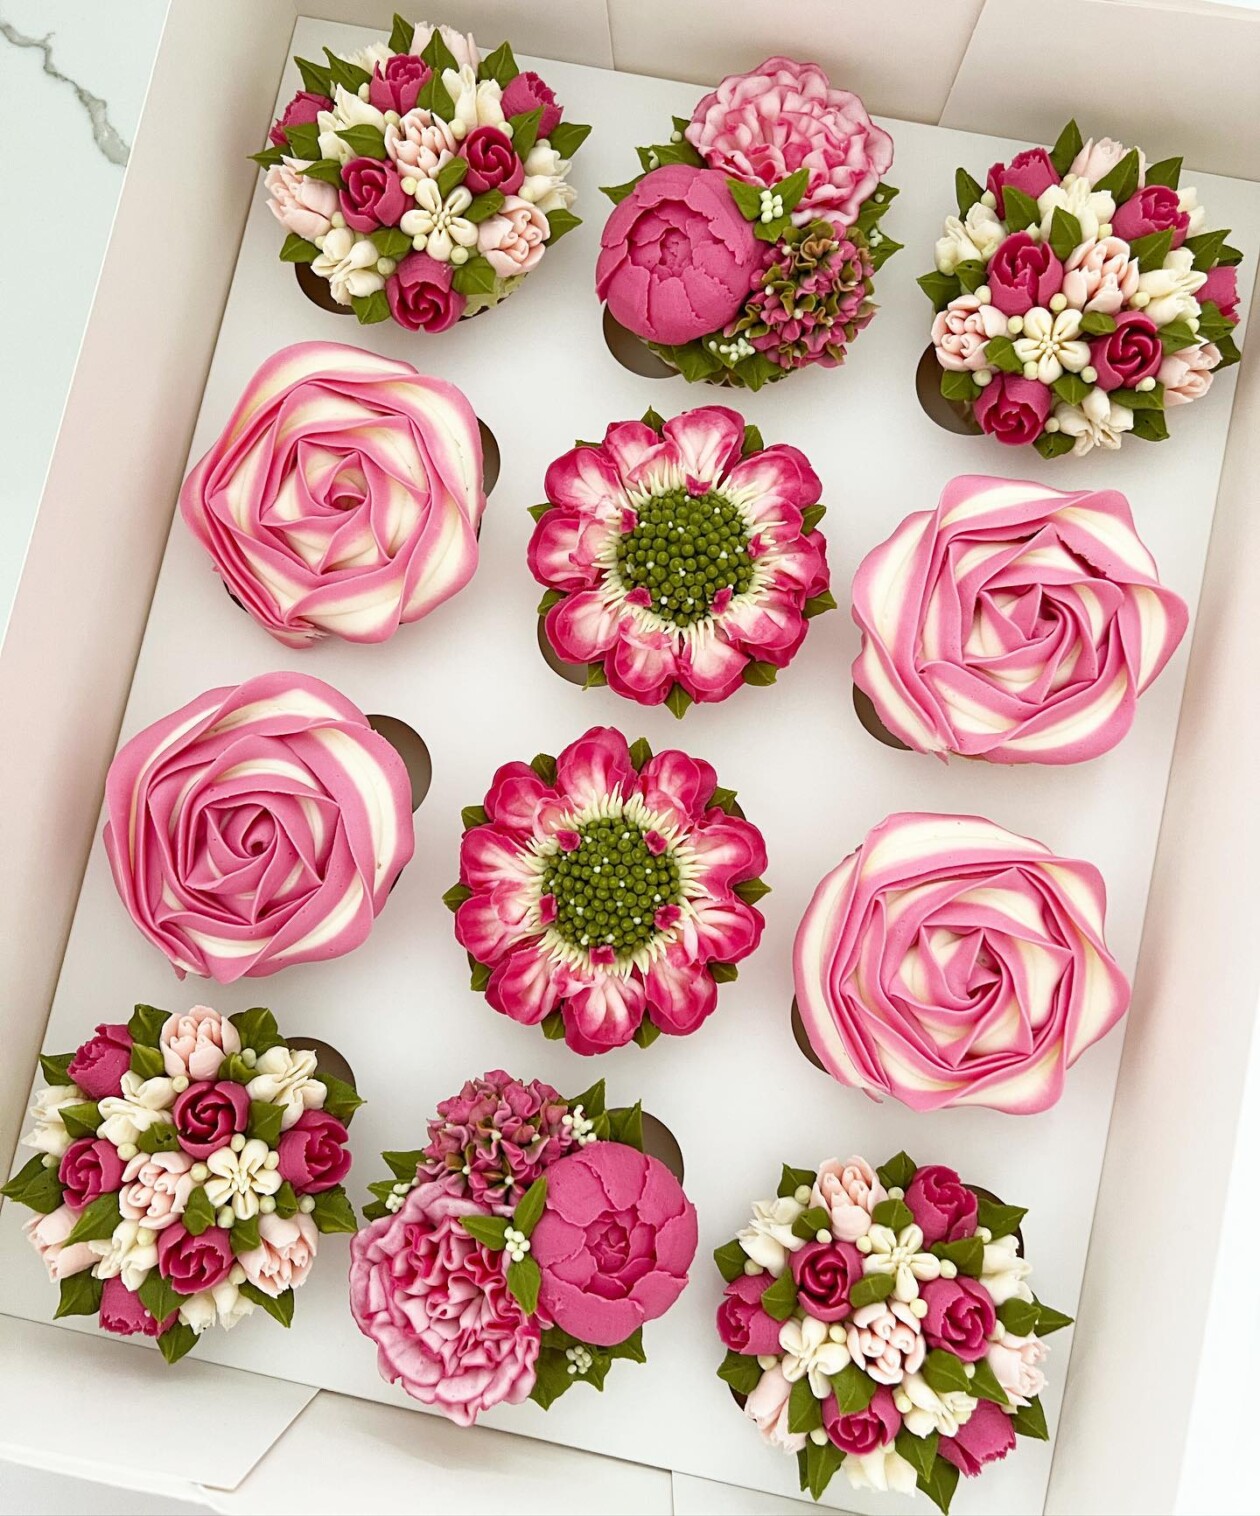 Gorgeous Cupcakes Decorated With Buttercream Flowers And Succulents By Kerry's Bouqcakes (3)